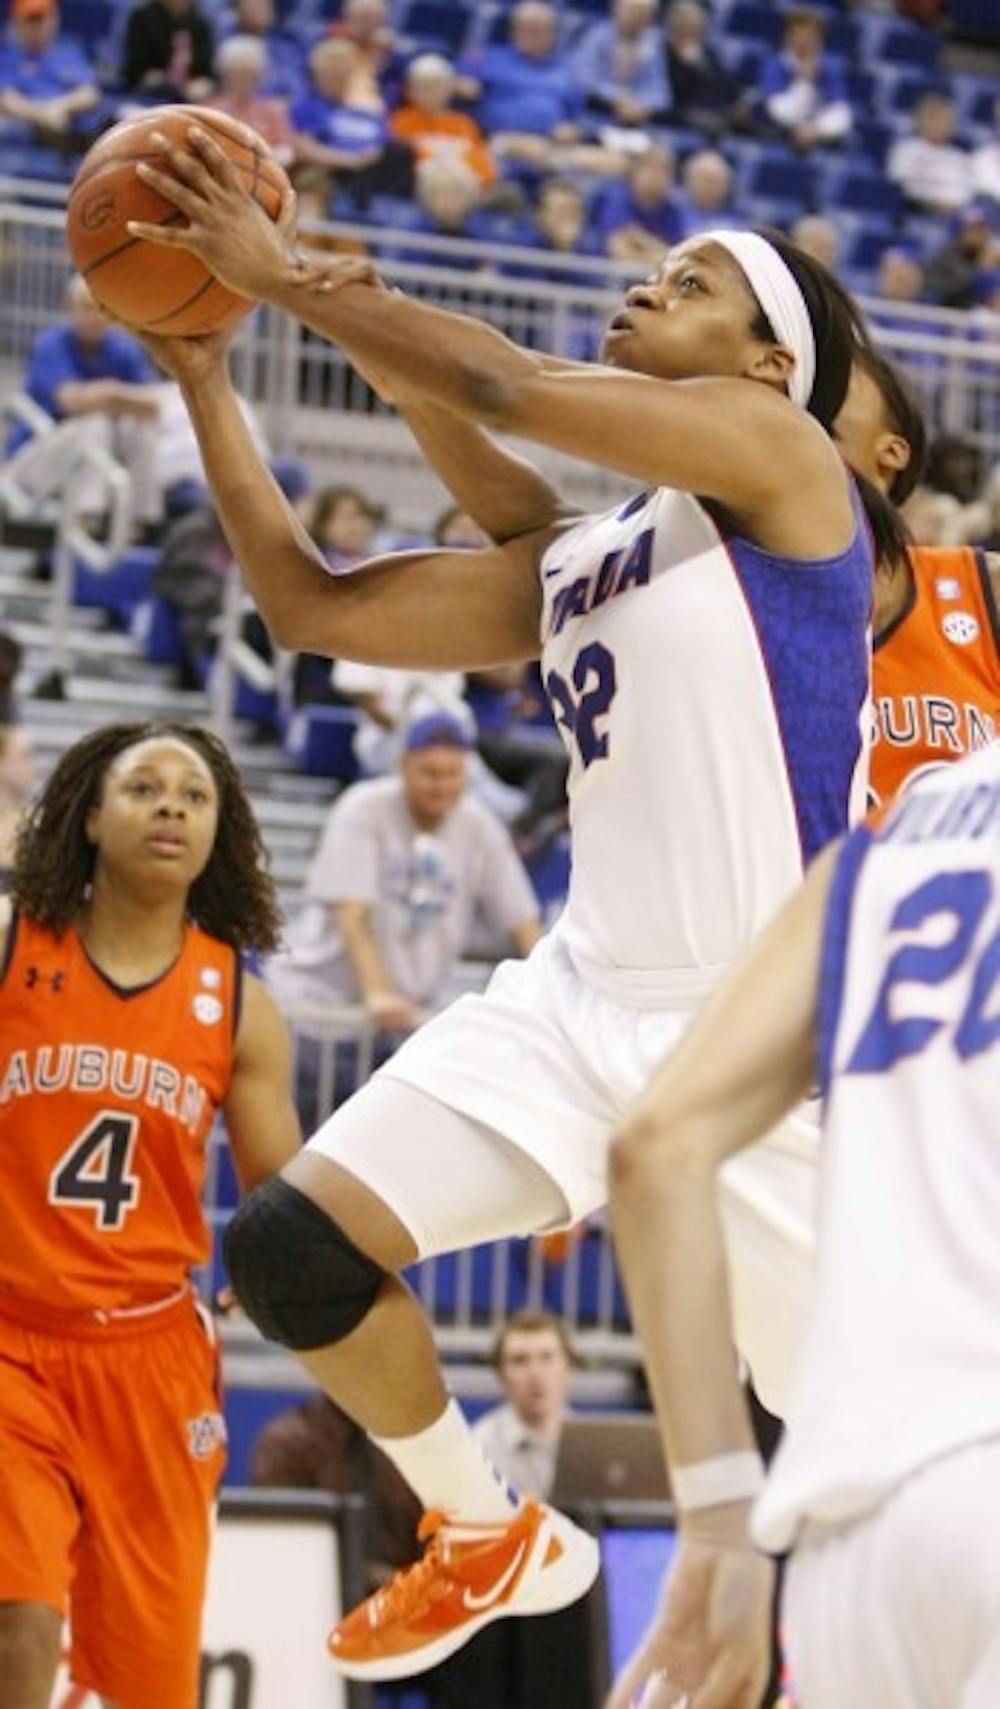 <p>Florida junior forward Jennifer George notched her SEC-leading 14th double-double against Tennessee with 11 points and 11 boards.</p>